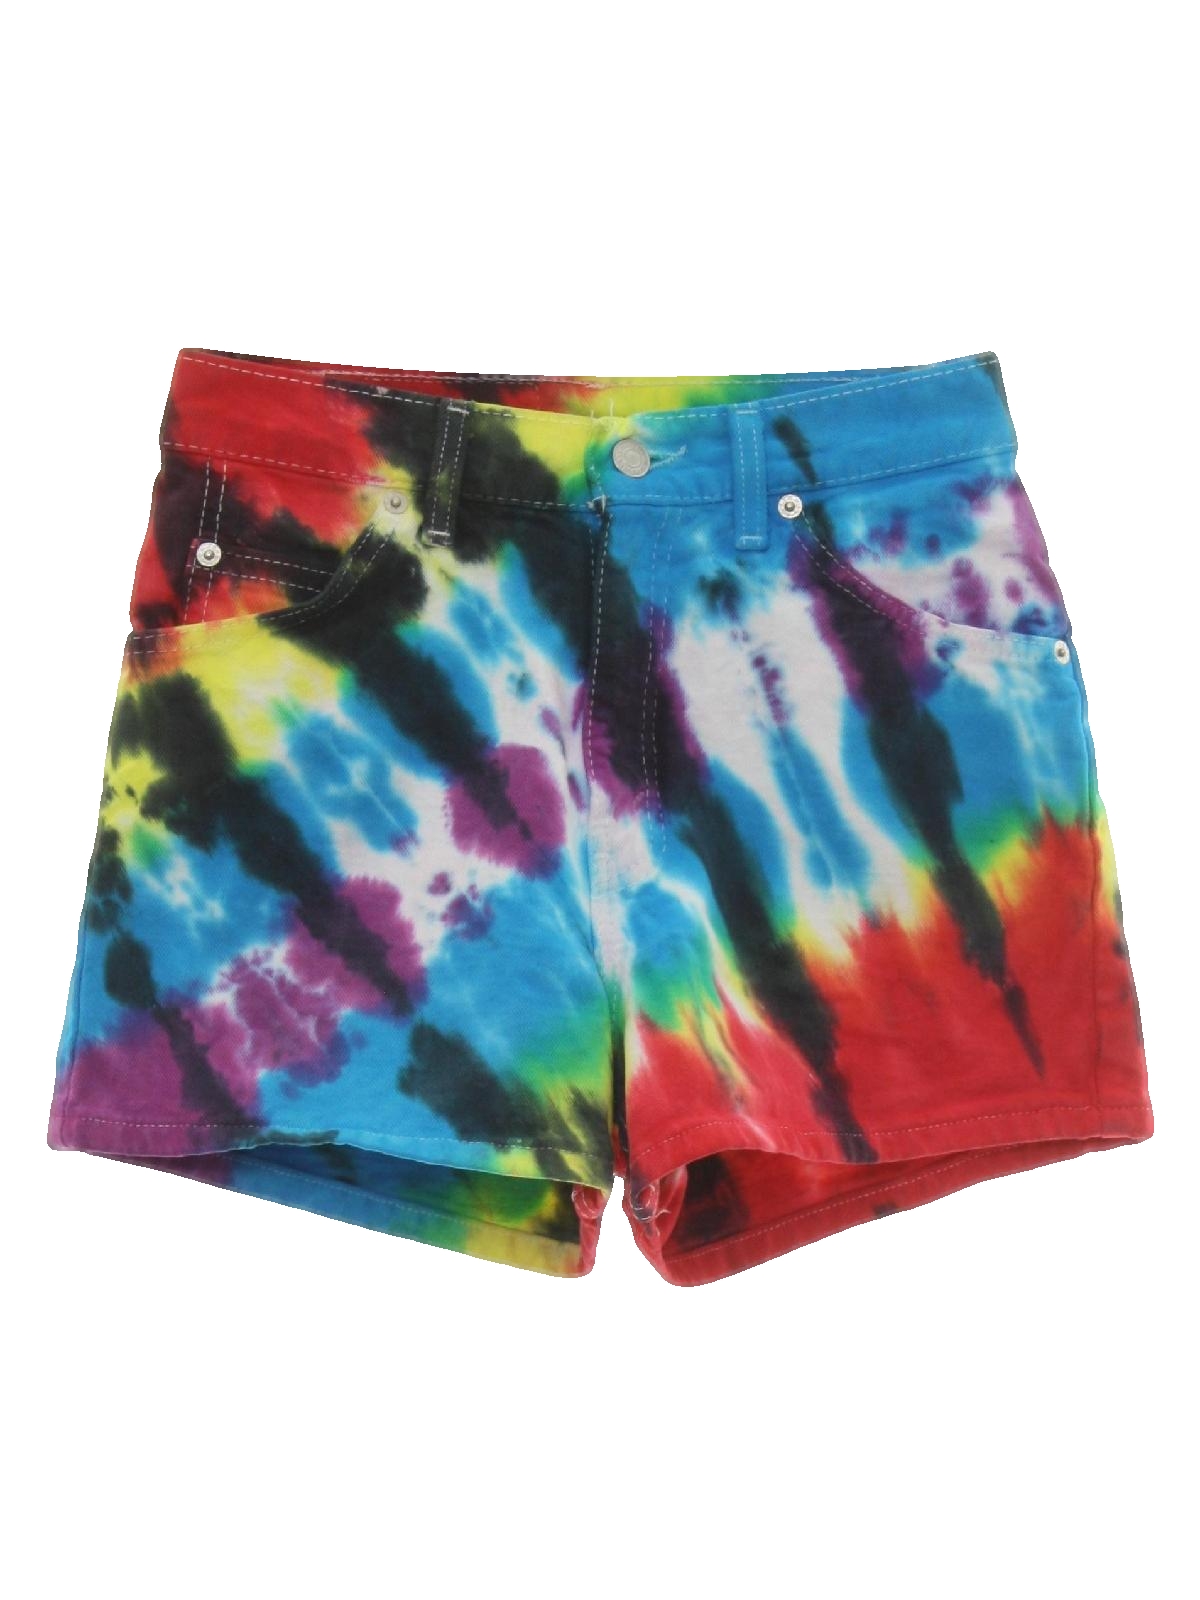 Levis 912 70's Vintage Shorts: 70s Style (Made Recently) -Levis 912- Womens  rainbow, white and black hand tie dyed background, cotton denim shorts with  button and zippered front closure, classic five pocket